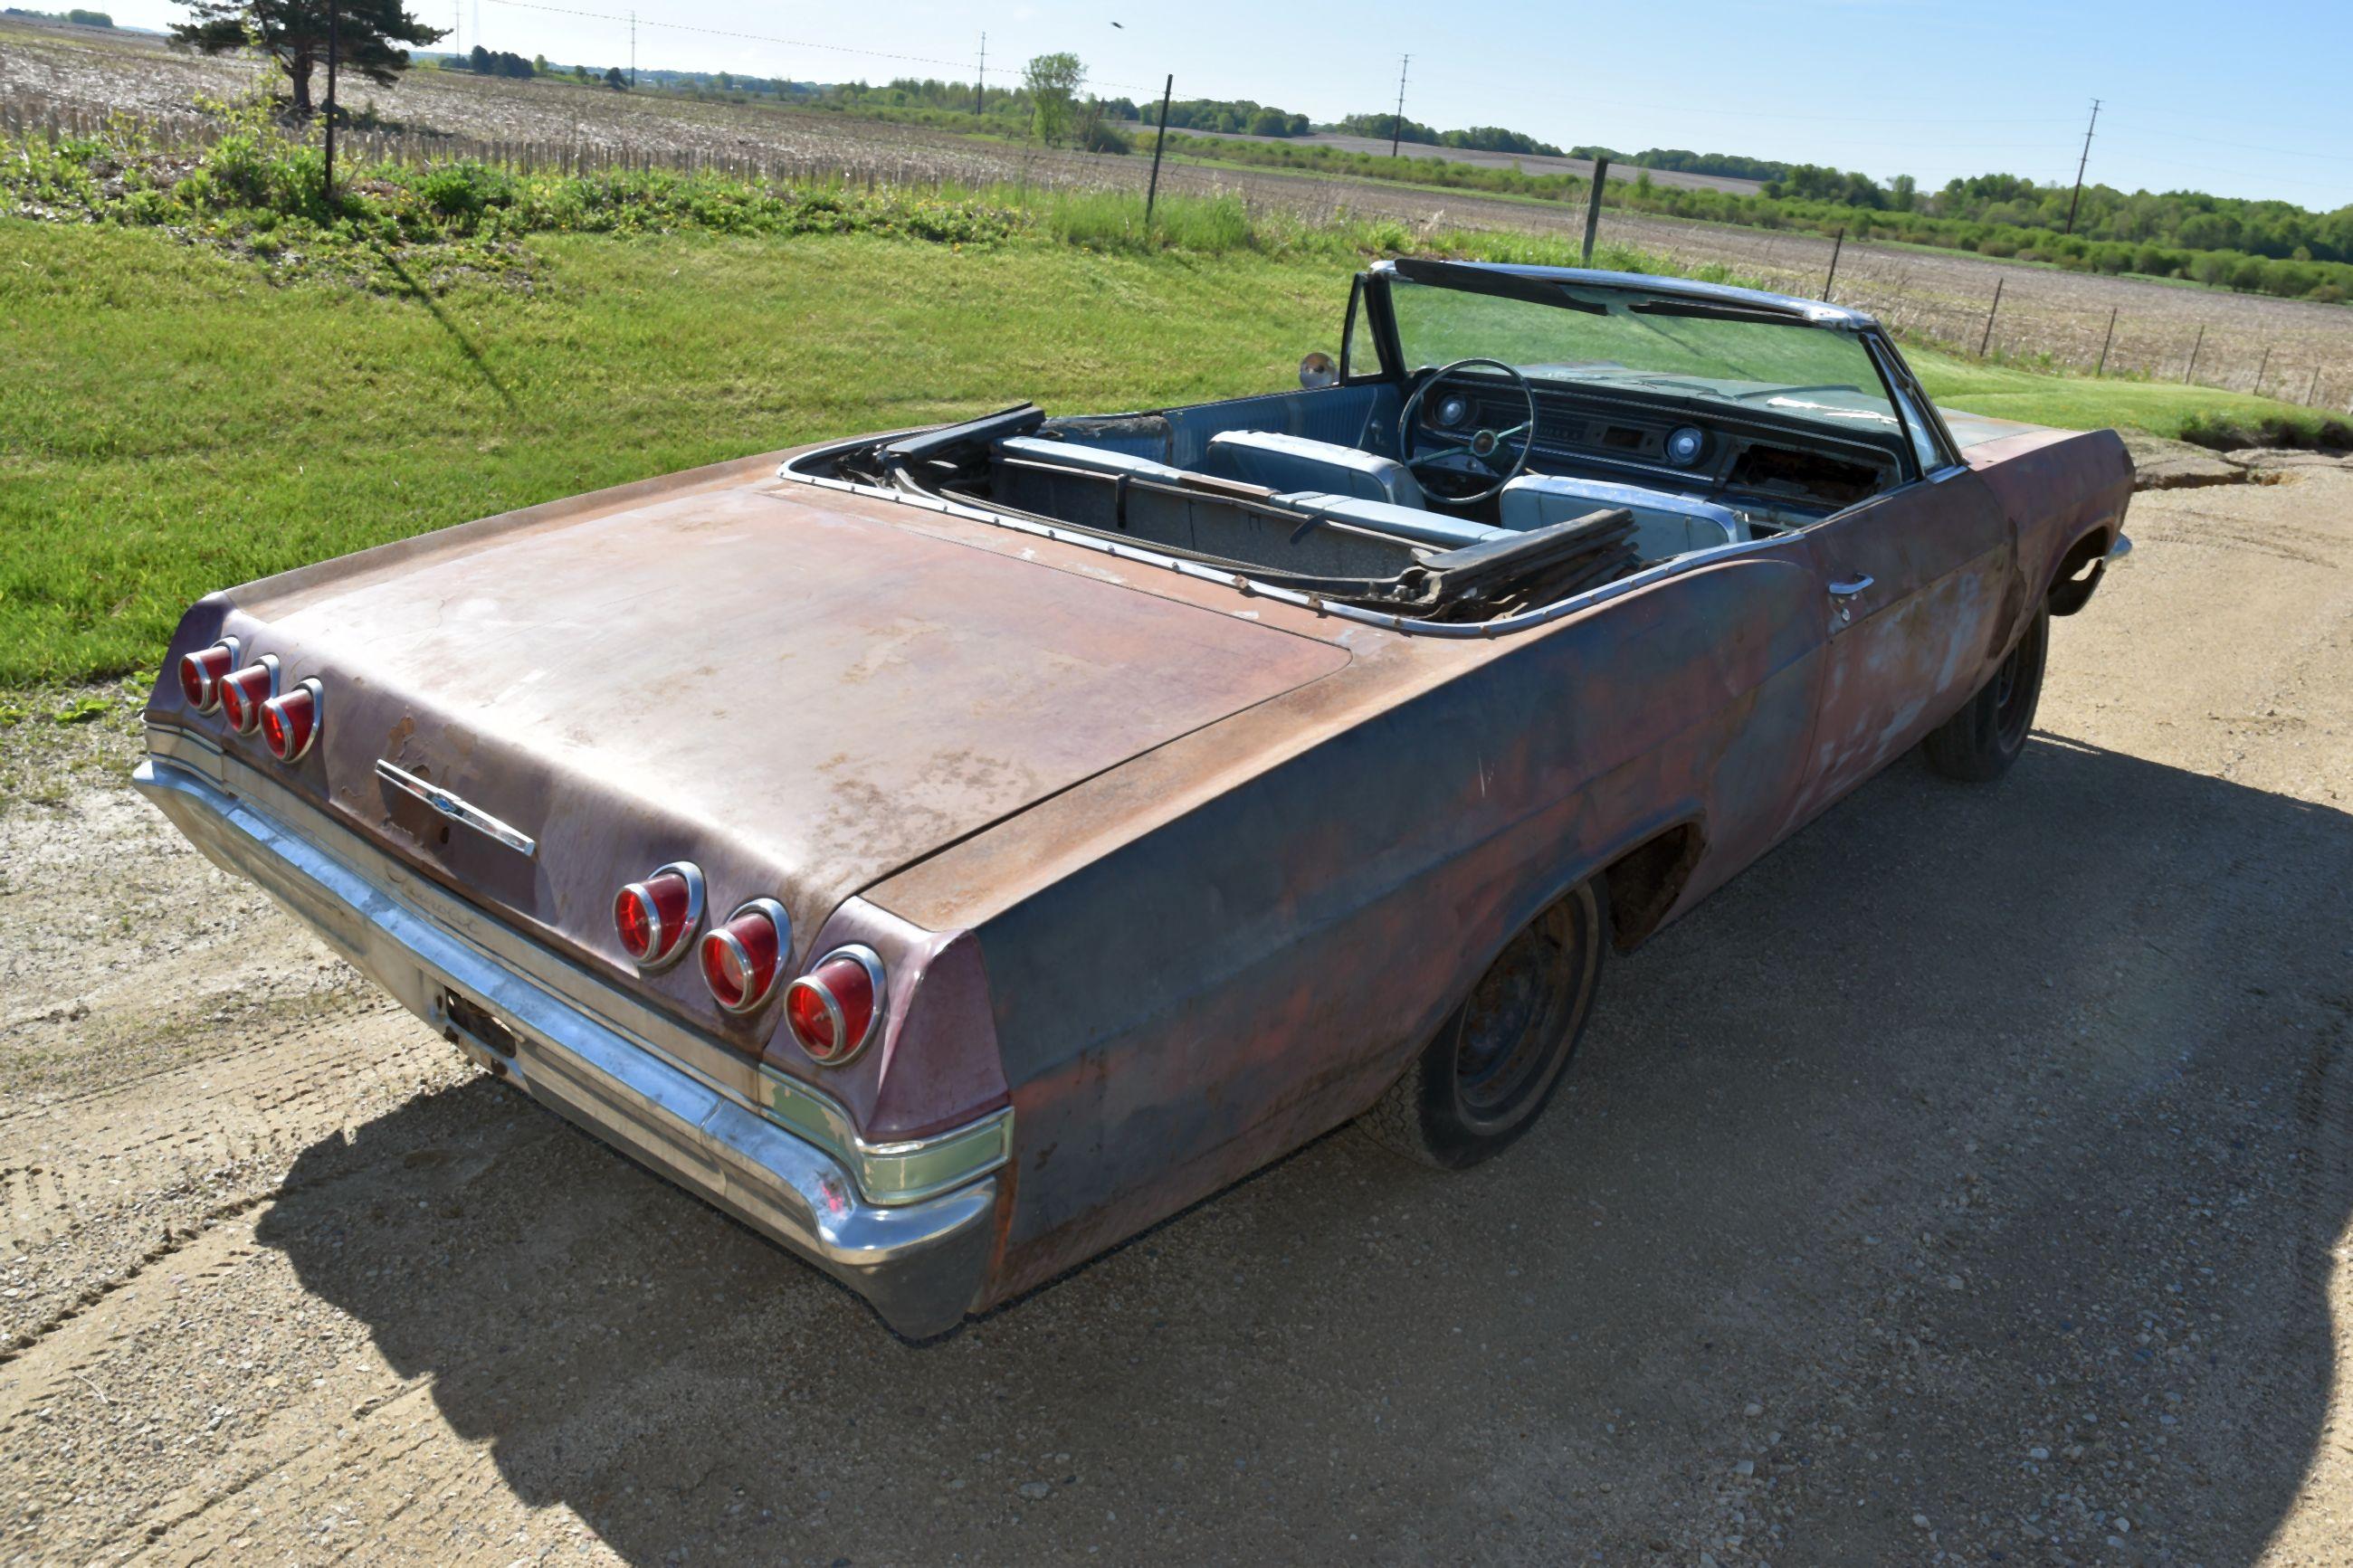 1965 Chevy Impala SS, Convertible, No Motor & Transmission, No Title, Sold With Bill Of Sale Only